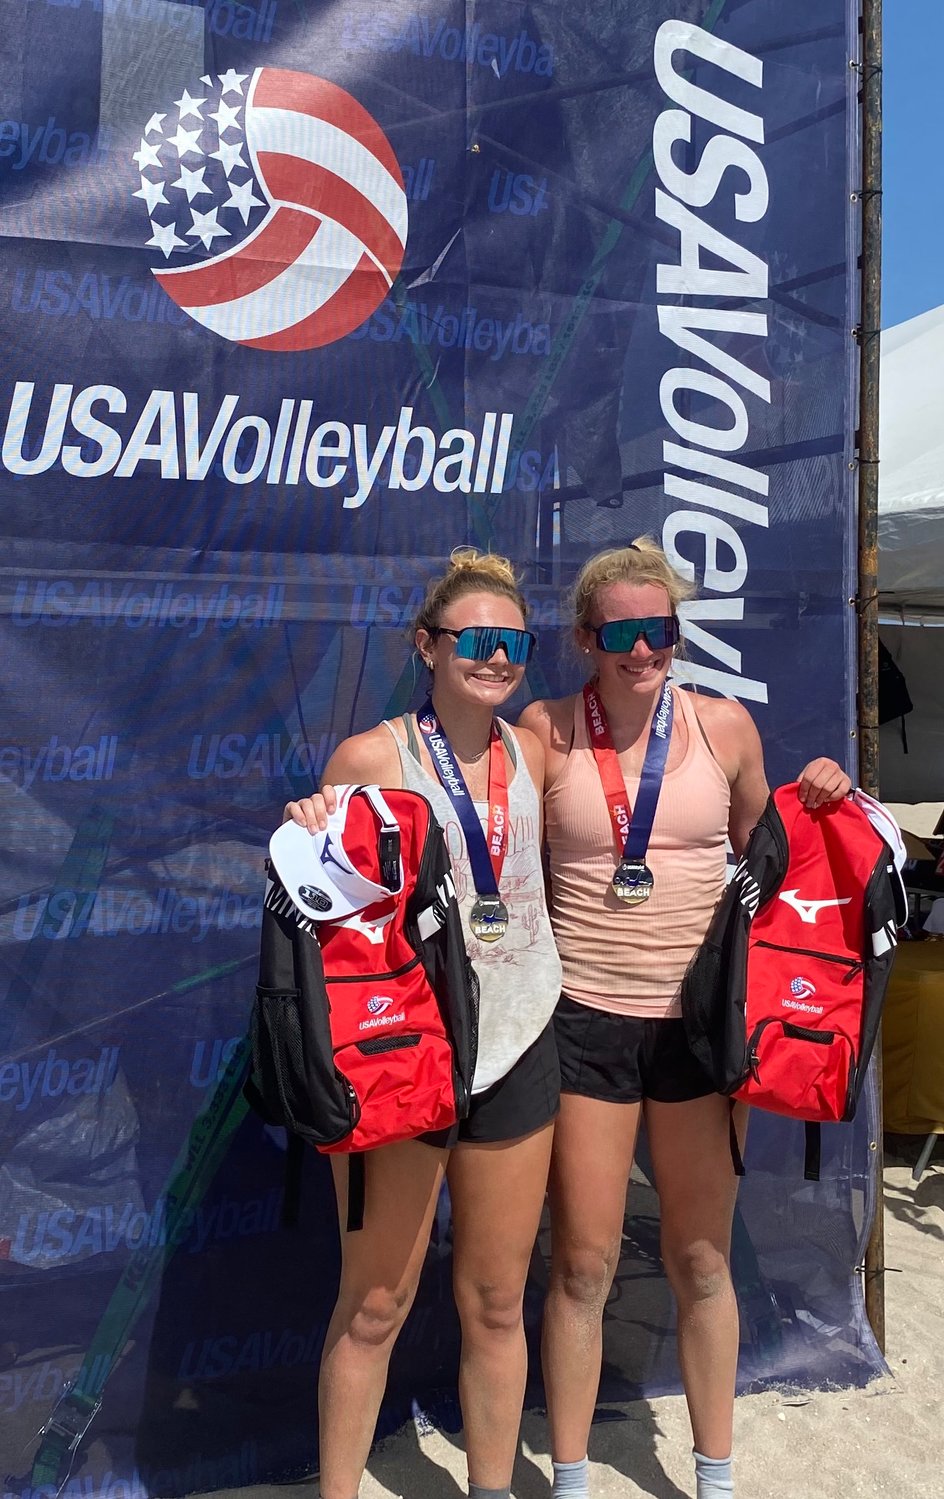 Mollie and her beach partner Mia Scanlon placed 2nd in the USAV Nationals 16 Division.